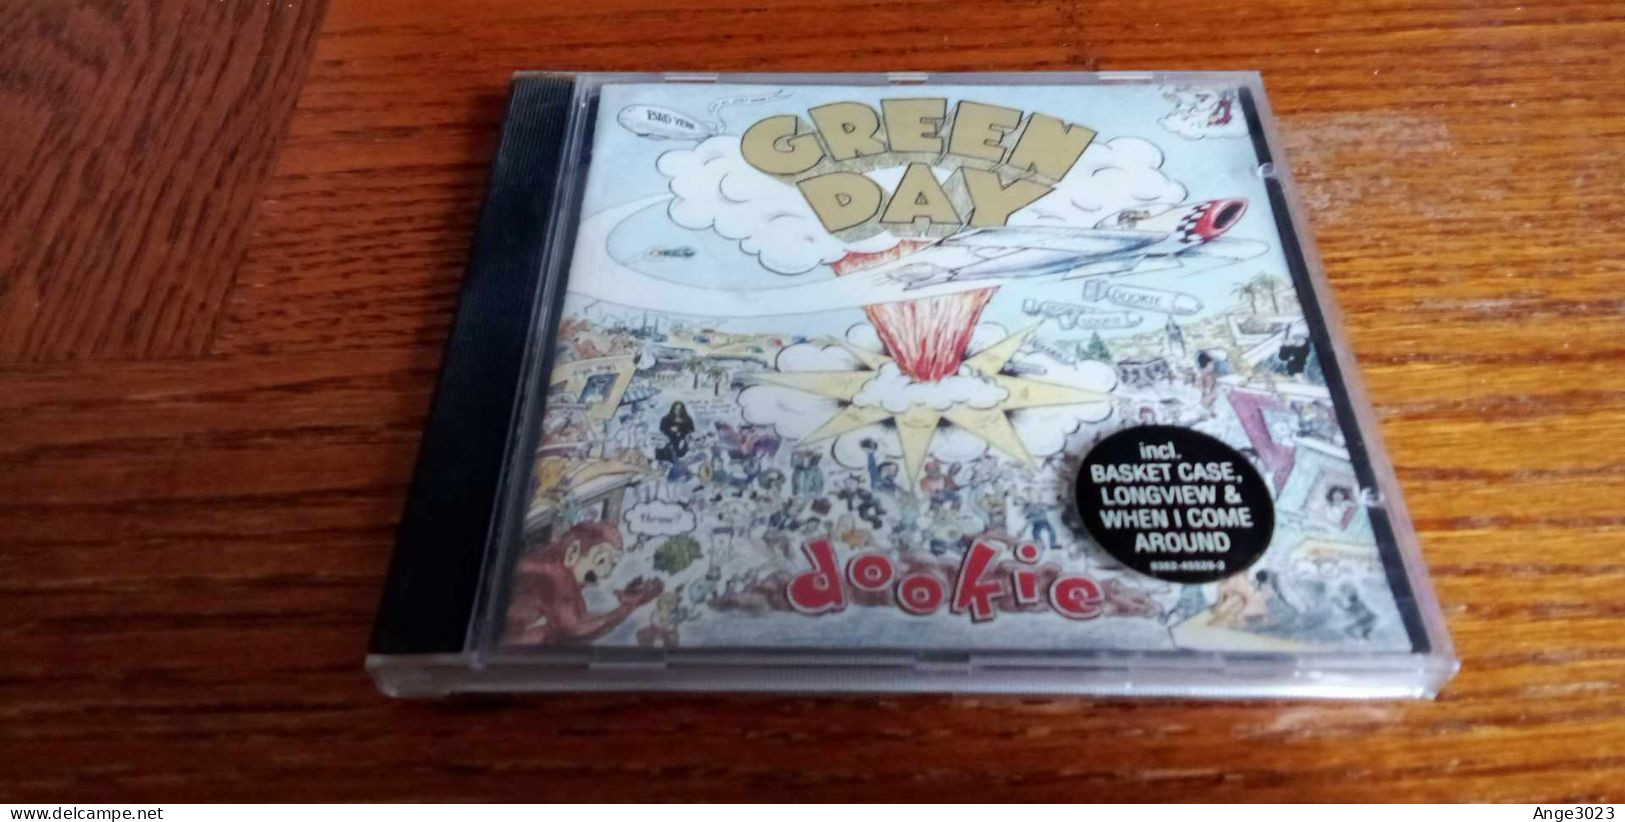 GREEN DAY "Dookie" - Punk